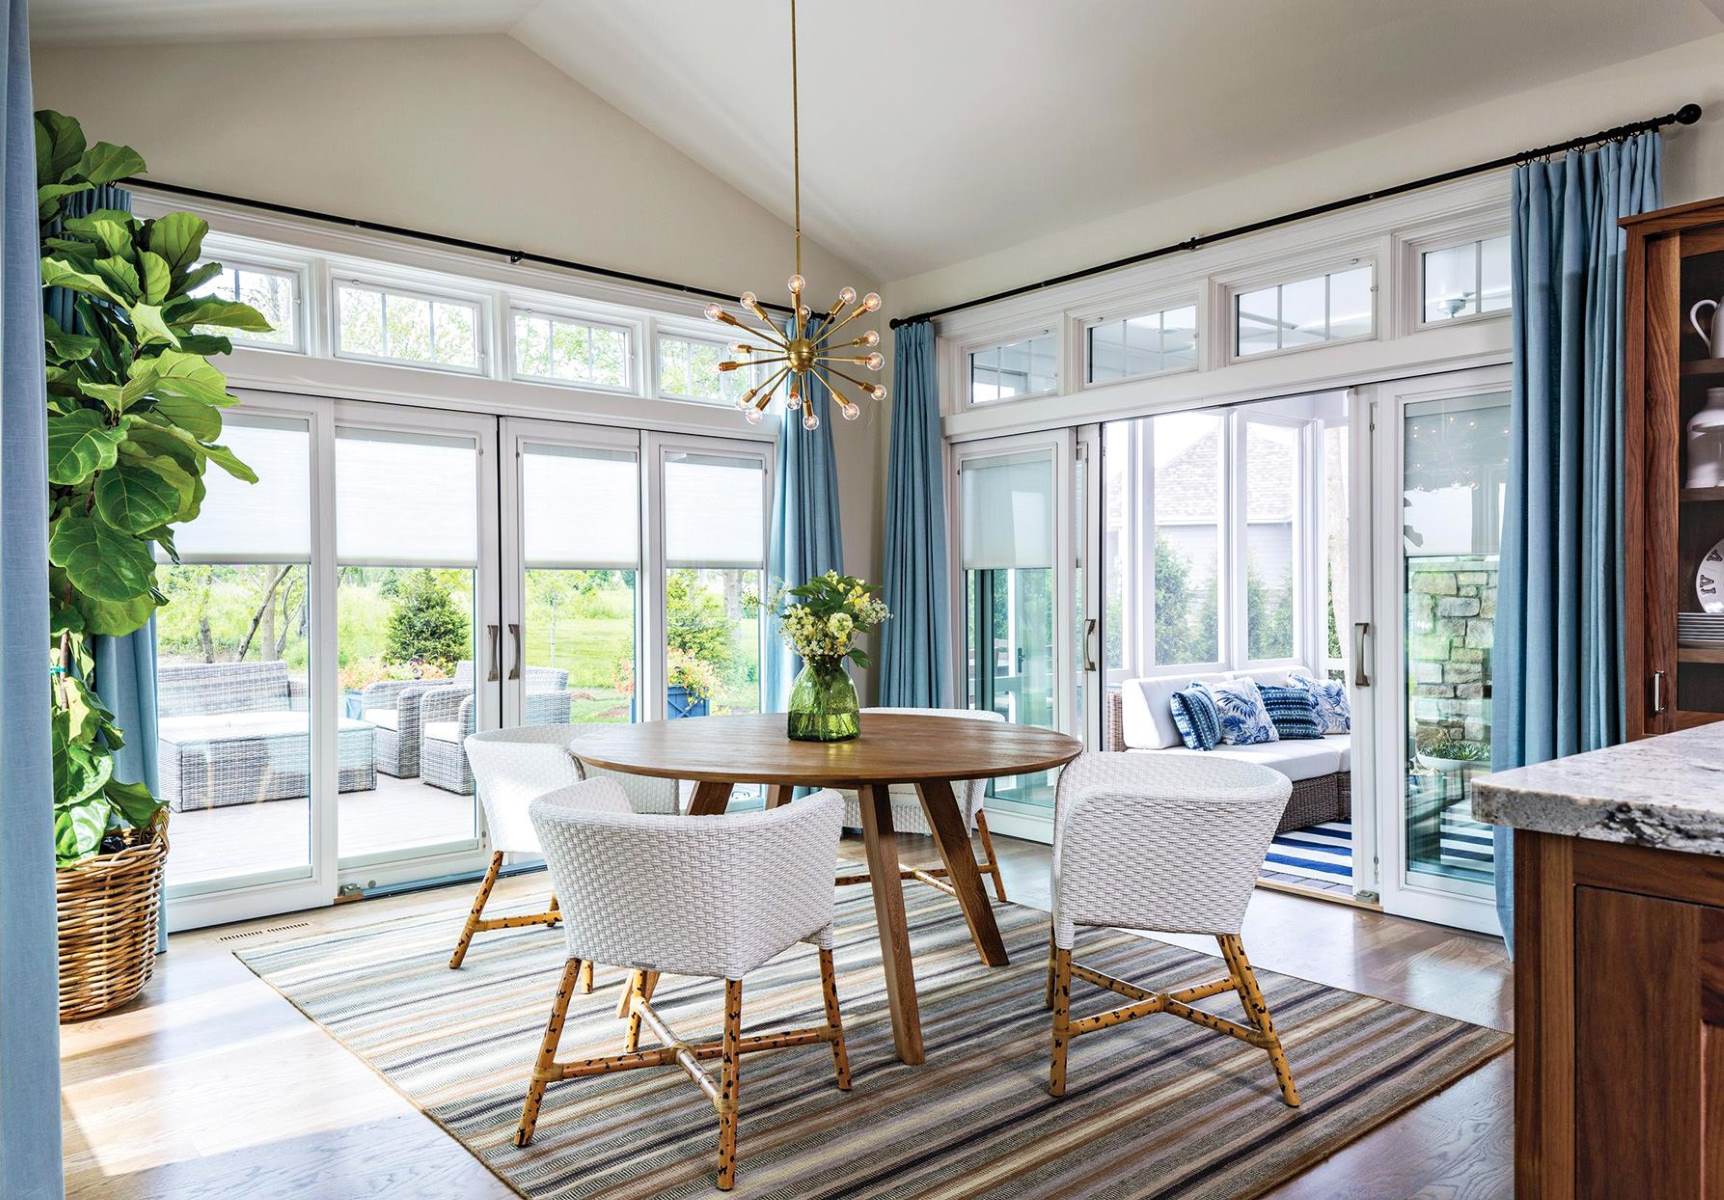 How To Hang Curtains Over A Sliding Glass Door